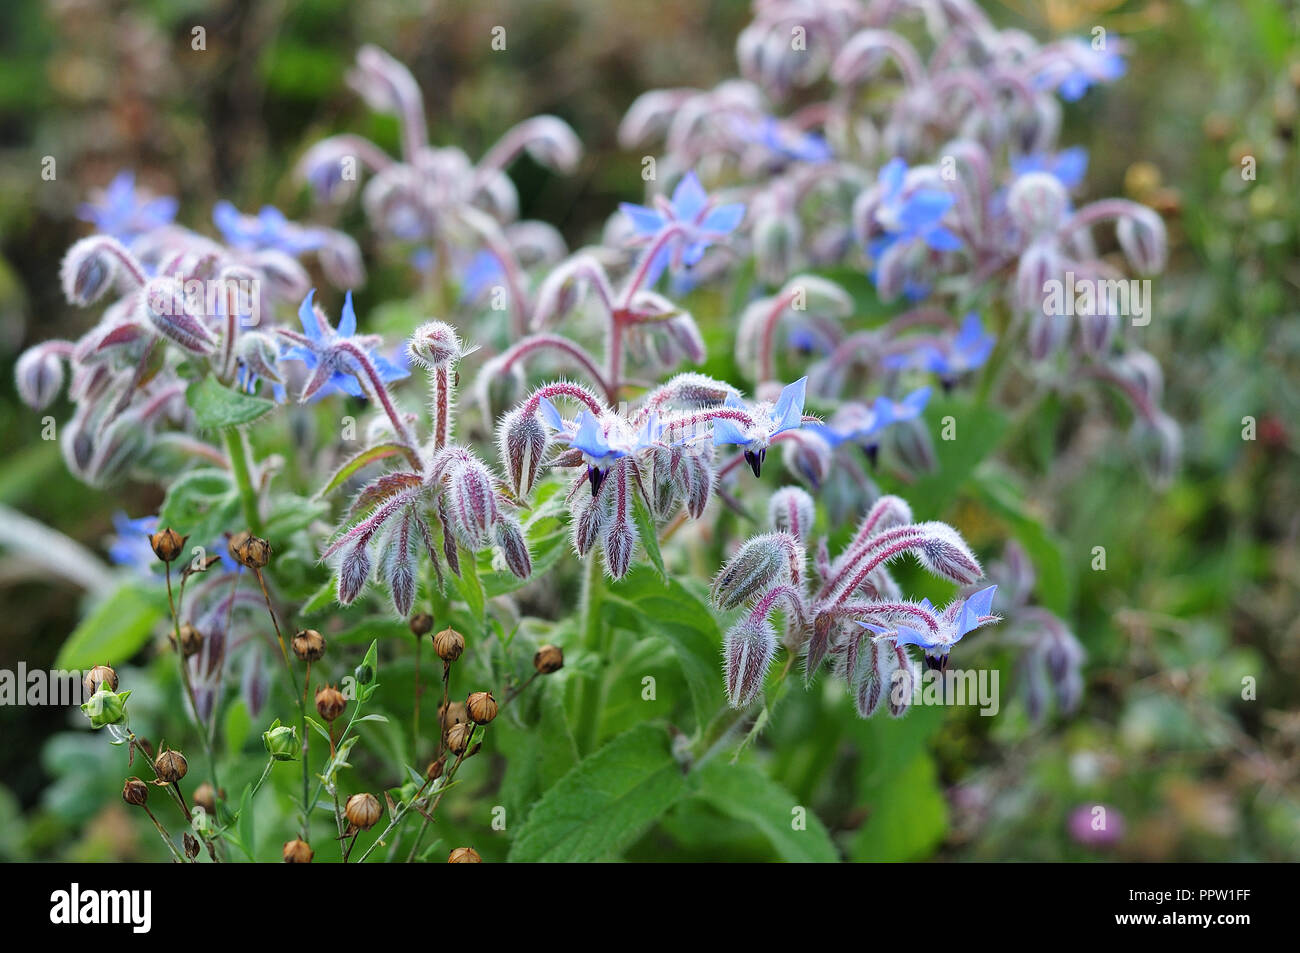 hairy borage plant on meadow with blue star shaped flowers Stock Photo